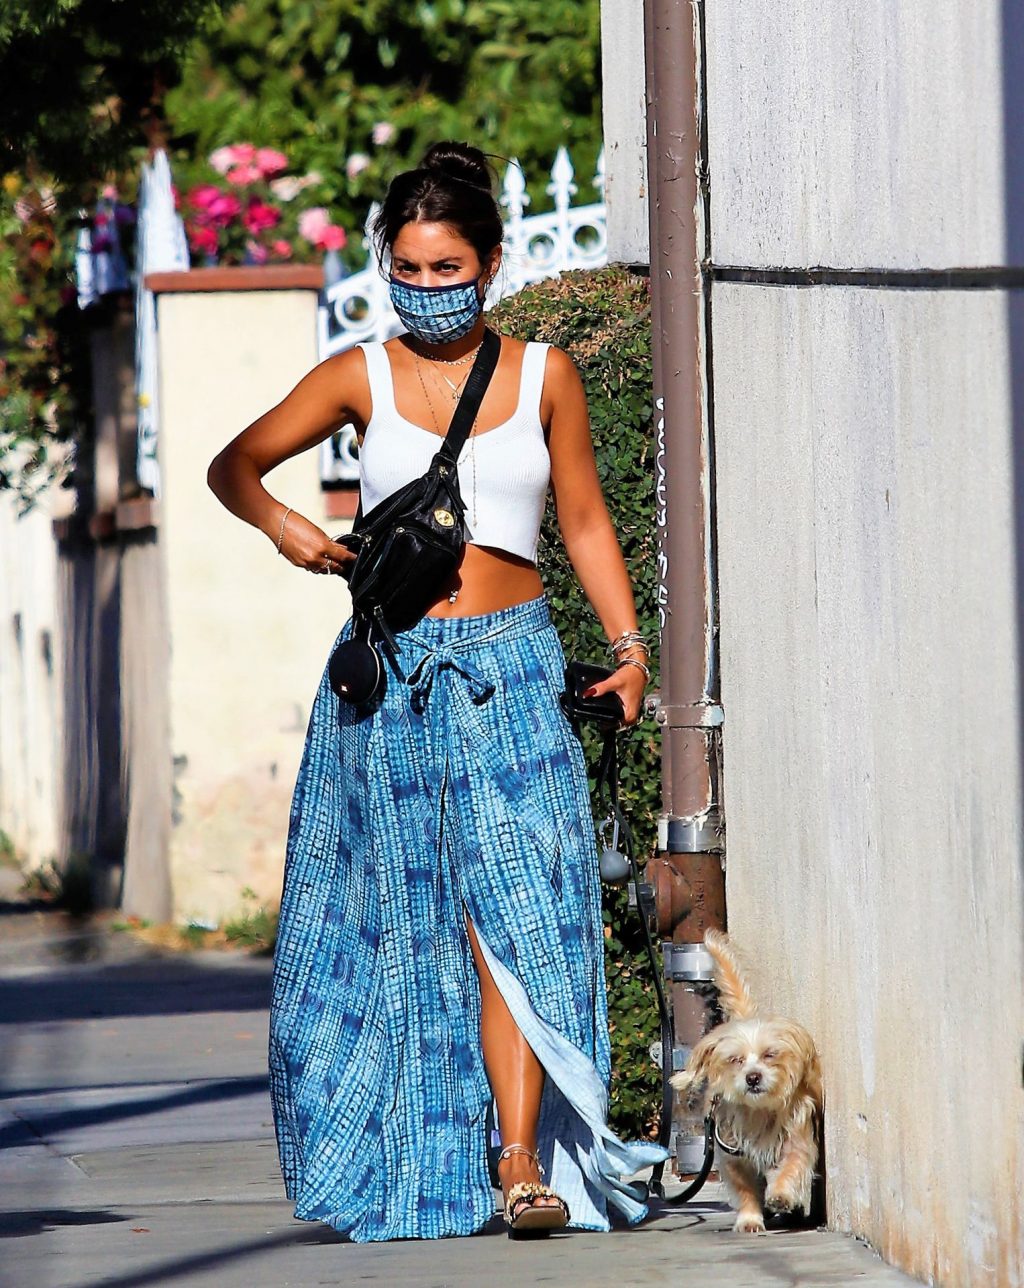 Sexy Vanessa Hudgens Is Pictured in Los Angeles (64 Photos)